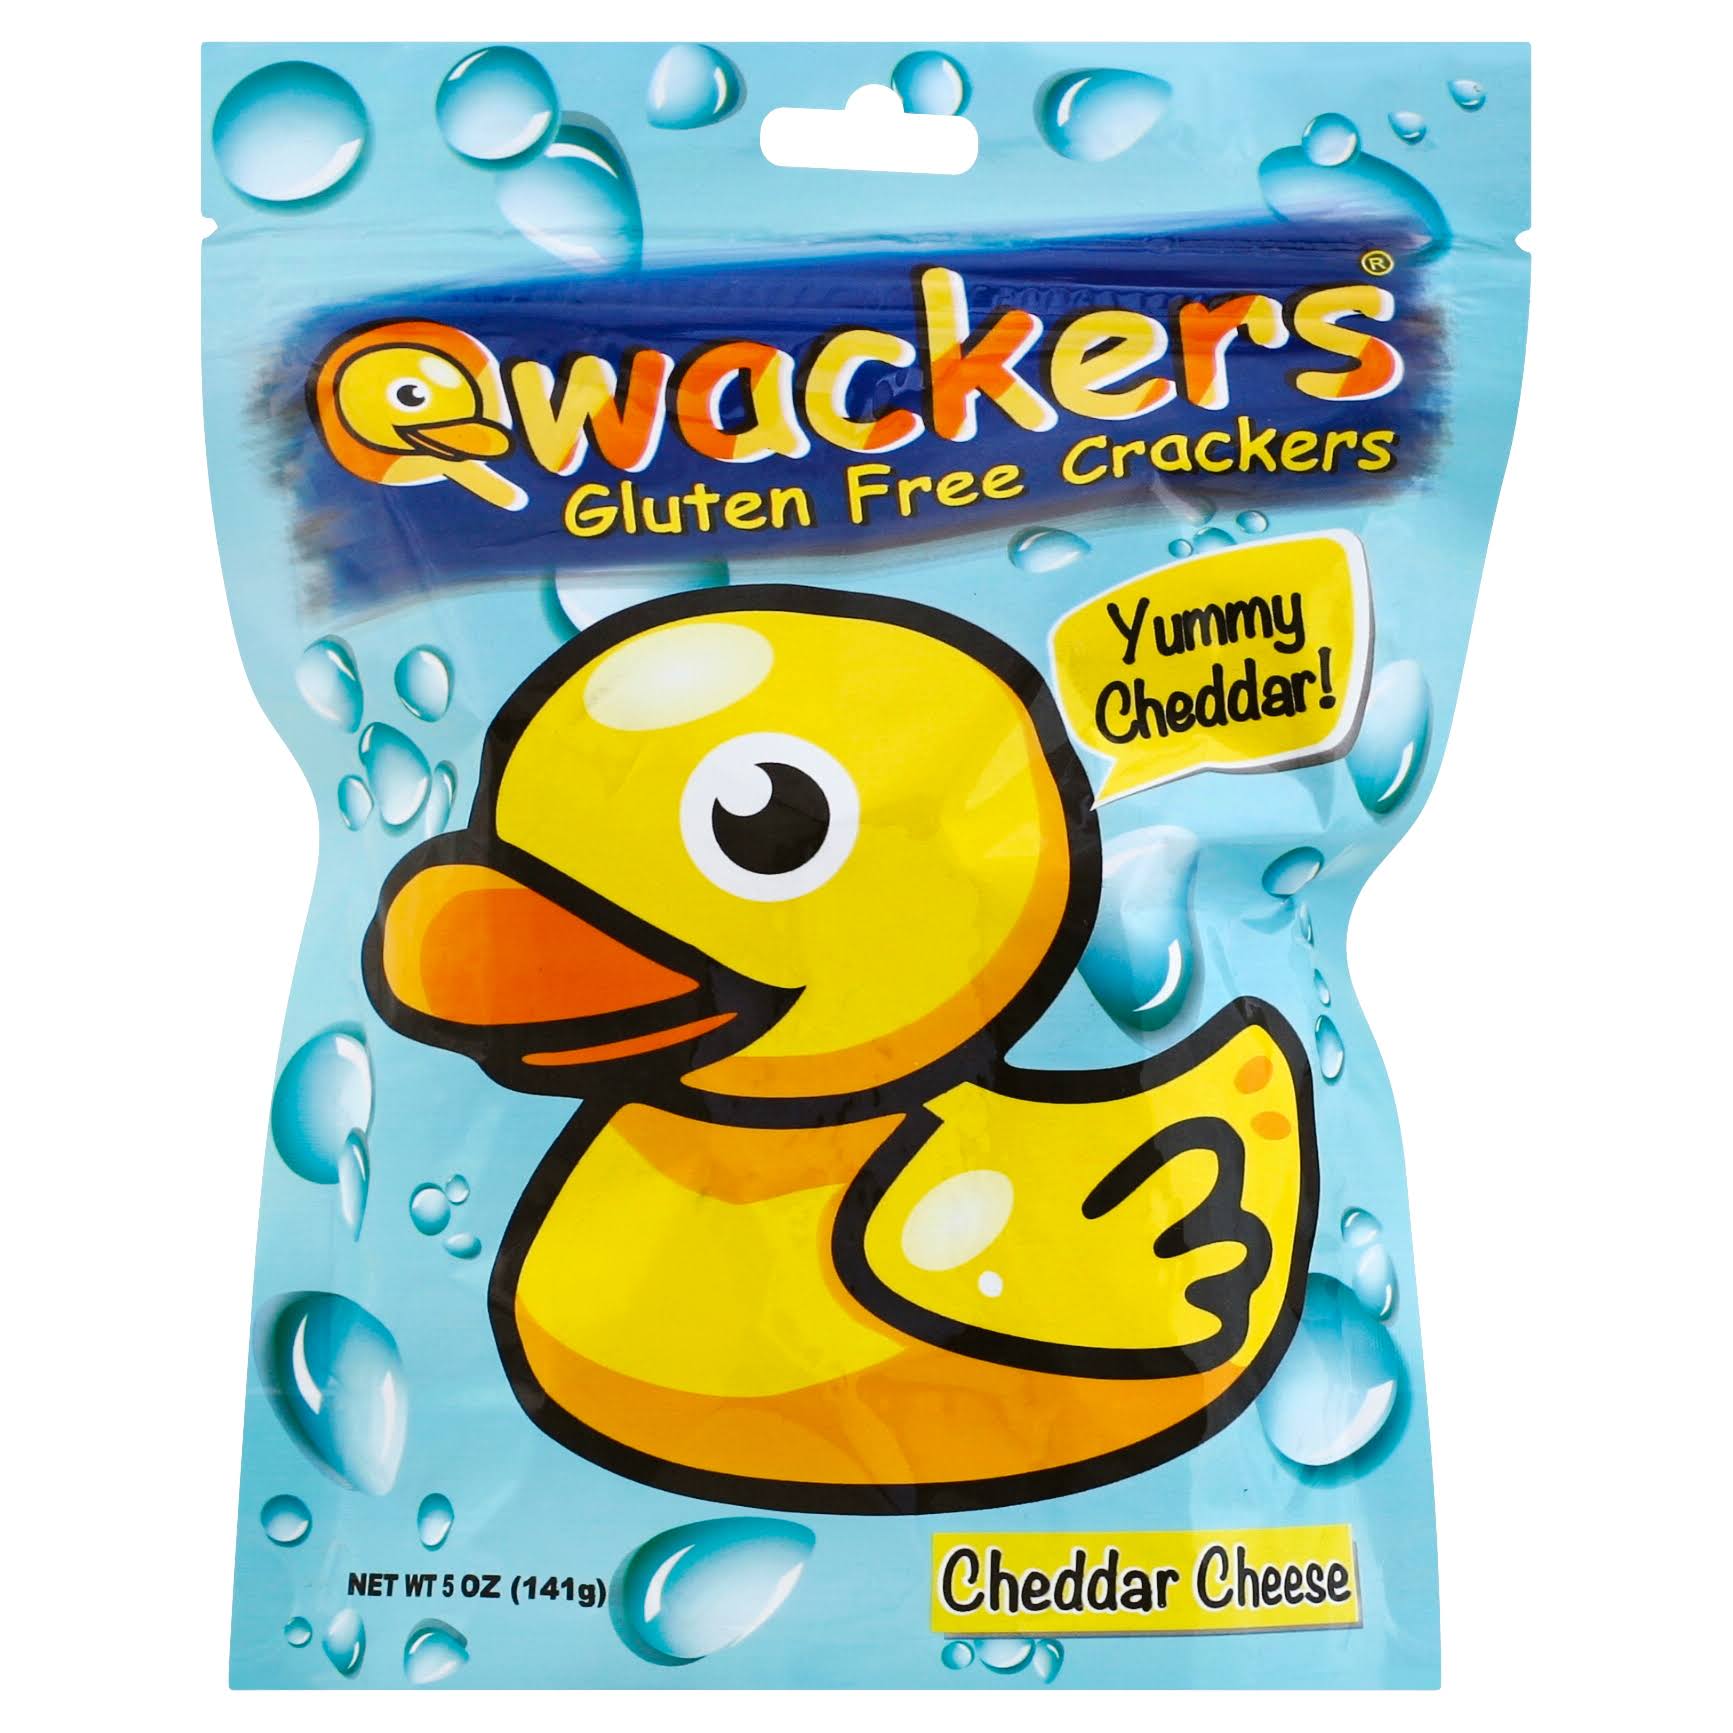 Qwackers Gluten Free Crackers - Cheddar Cheese, 5oz